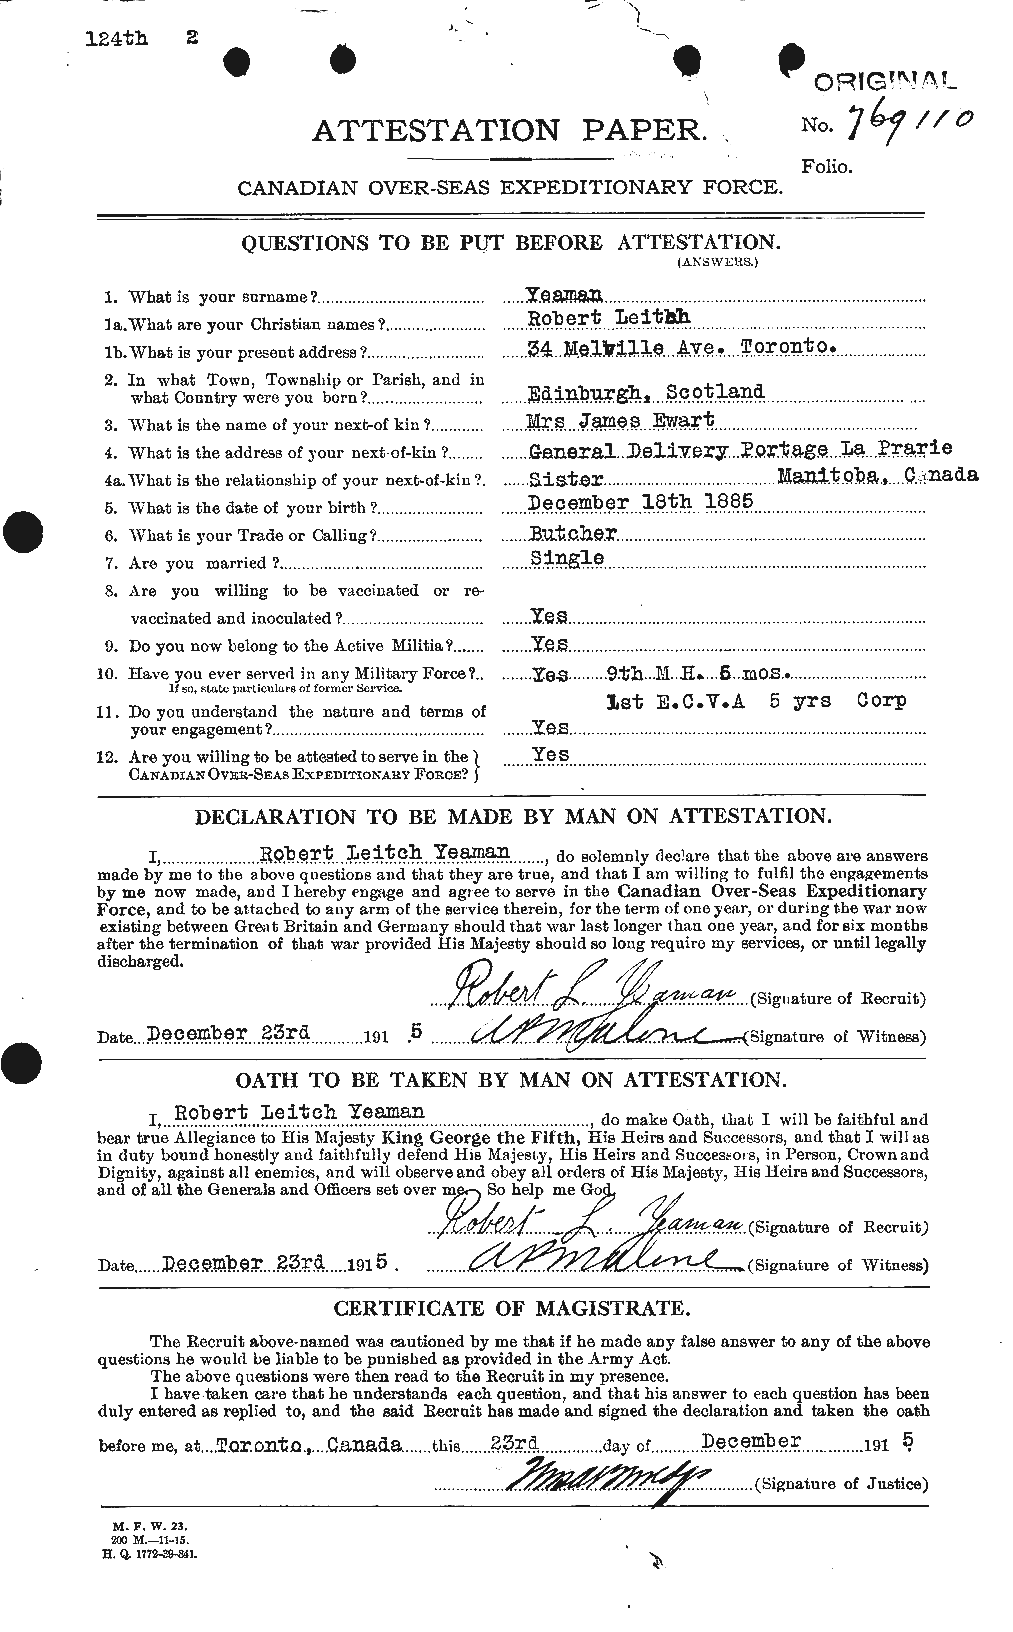 Personnel Records of the First World War - CEF 691376a